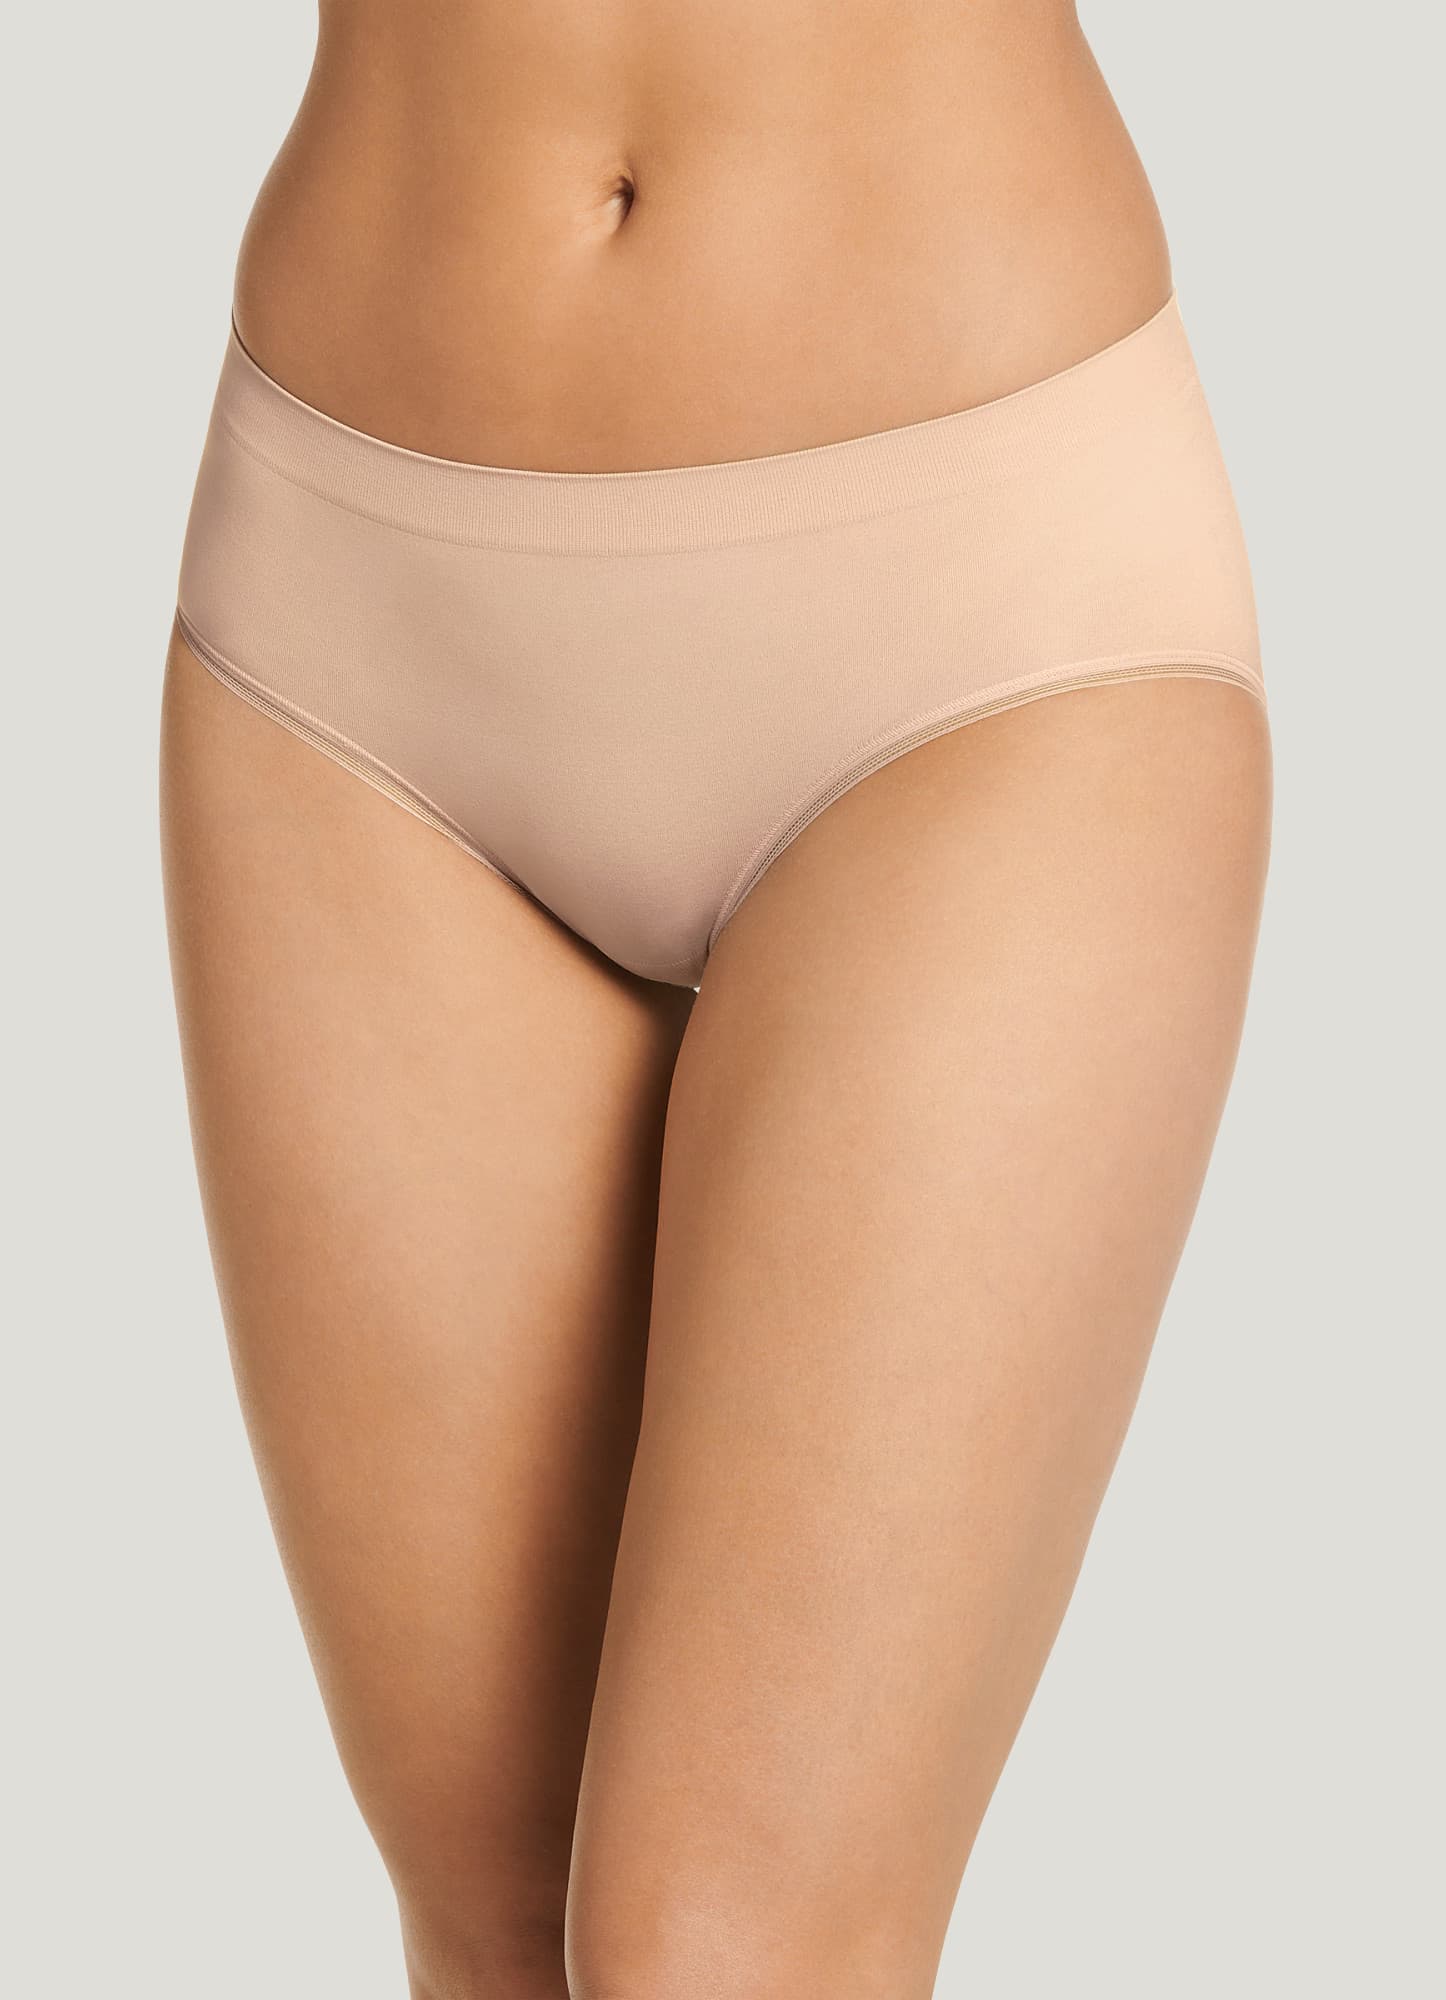 Which is more comfortable; cotton or microfiber panties? - Quora